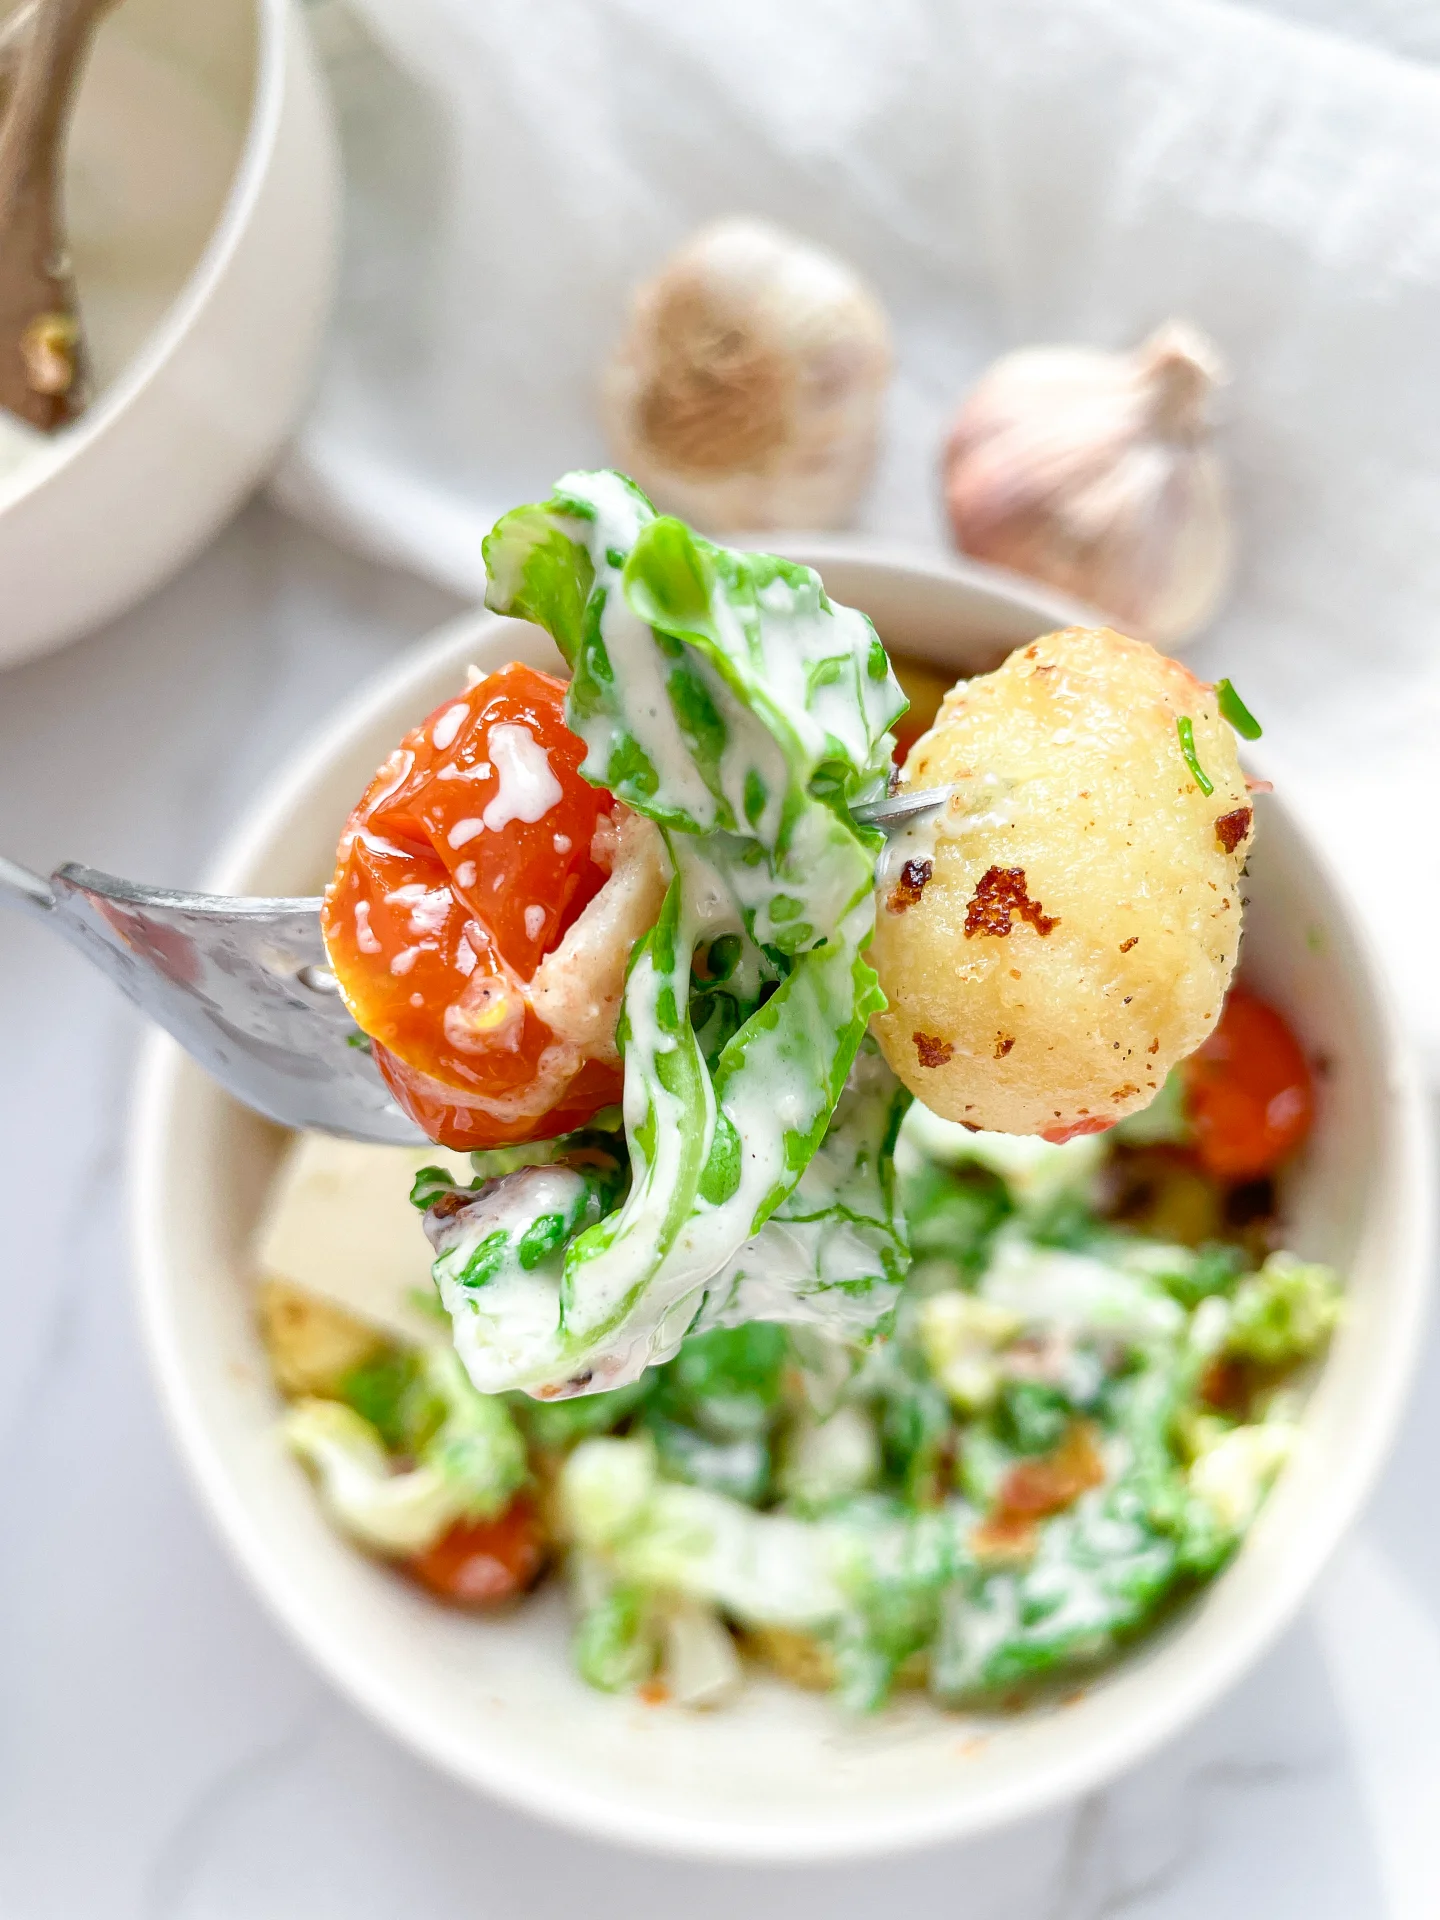 Gnocchi Romaine Salad with Oven-Roasted Tomatoes & Parmesan